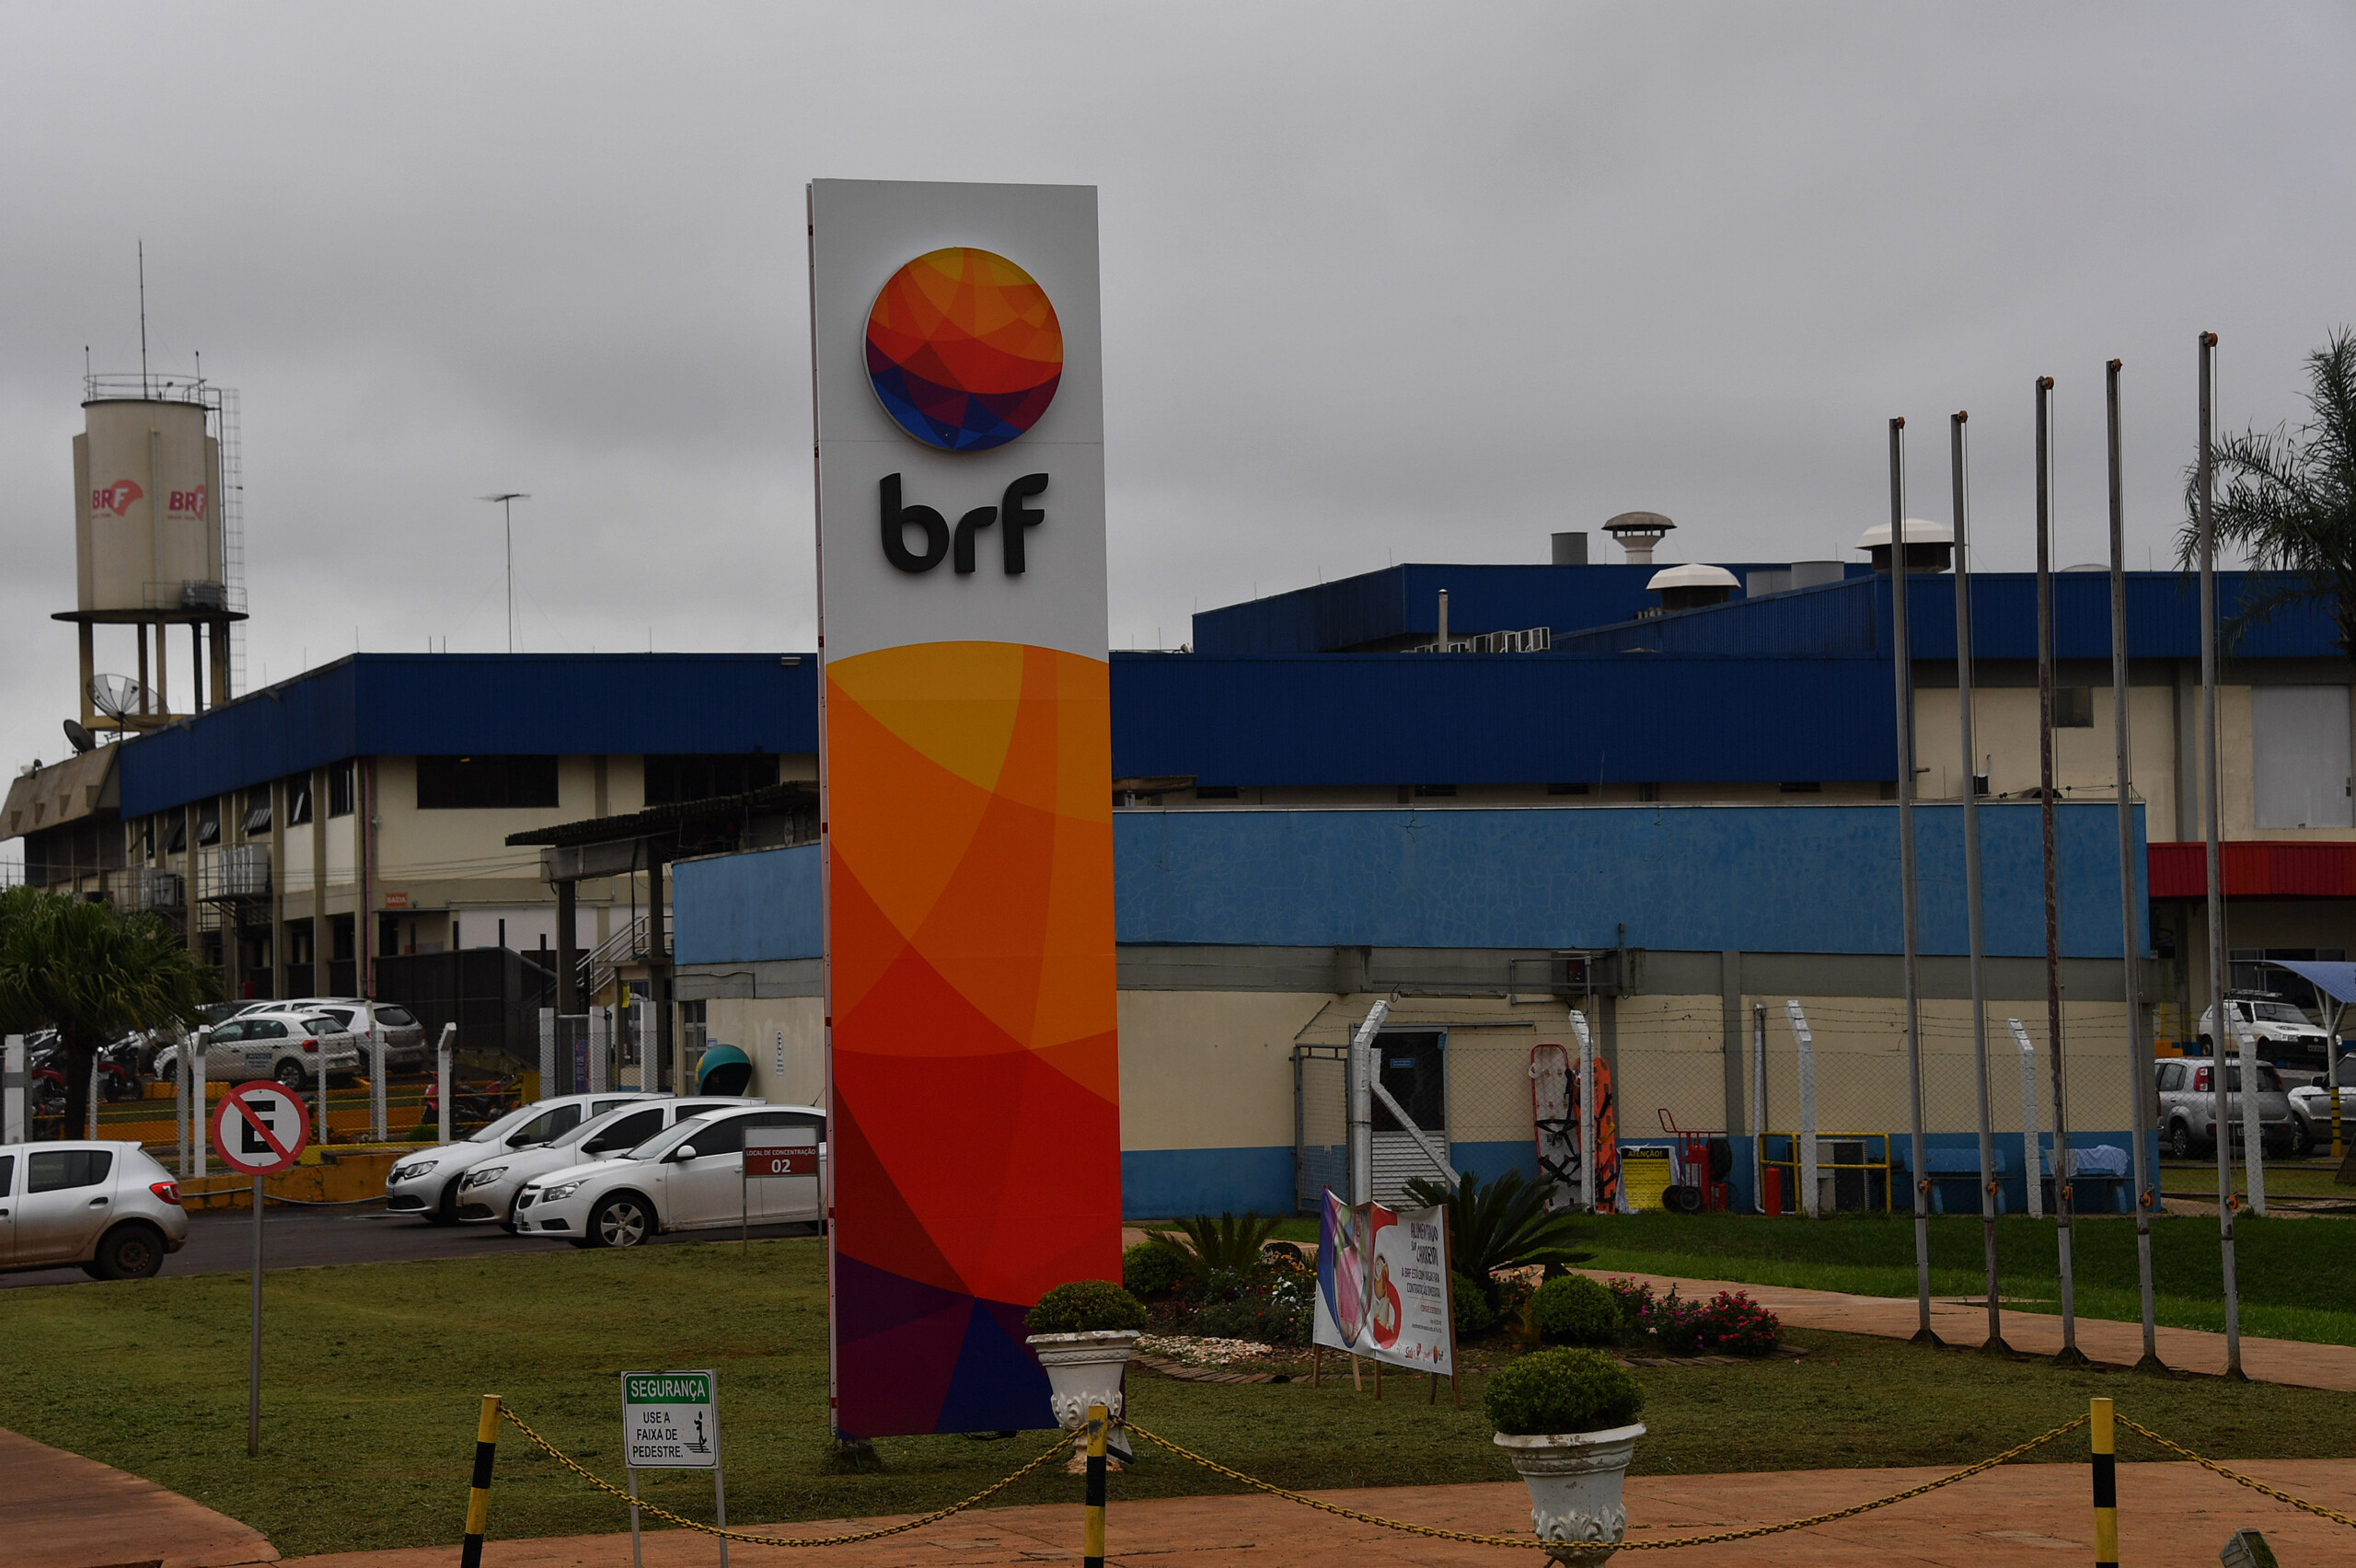 General view of Brazilian food company BRF's plant, under investigations for products adulteration in Chapeco, Santa Catarina state, Brazil on March 17, 2017.<br /><br /><br /><br />
Brazilian Federal police have dismantled, after two years of running the "weak flesh" operation, a vast network of adulterated food, involving major meat processing plants and inspectors who accepted bribes to approve products in bad condition for domestic consumption and exportation.  / AFP PHOTO / NELSON ALMEIDA        (Photo credit should read NELSON ALMEIDA/AFP/Getty Images)